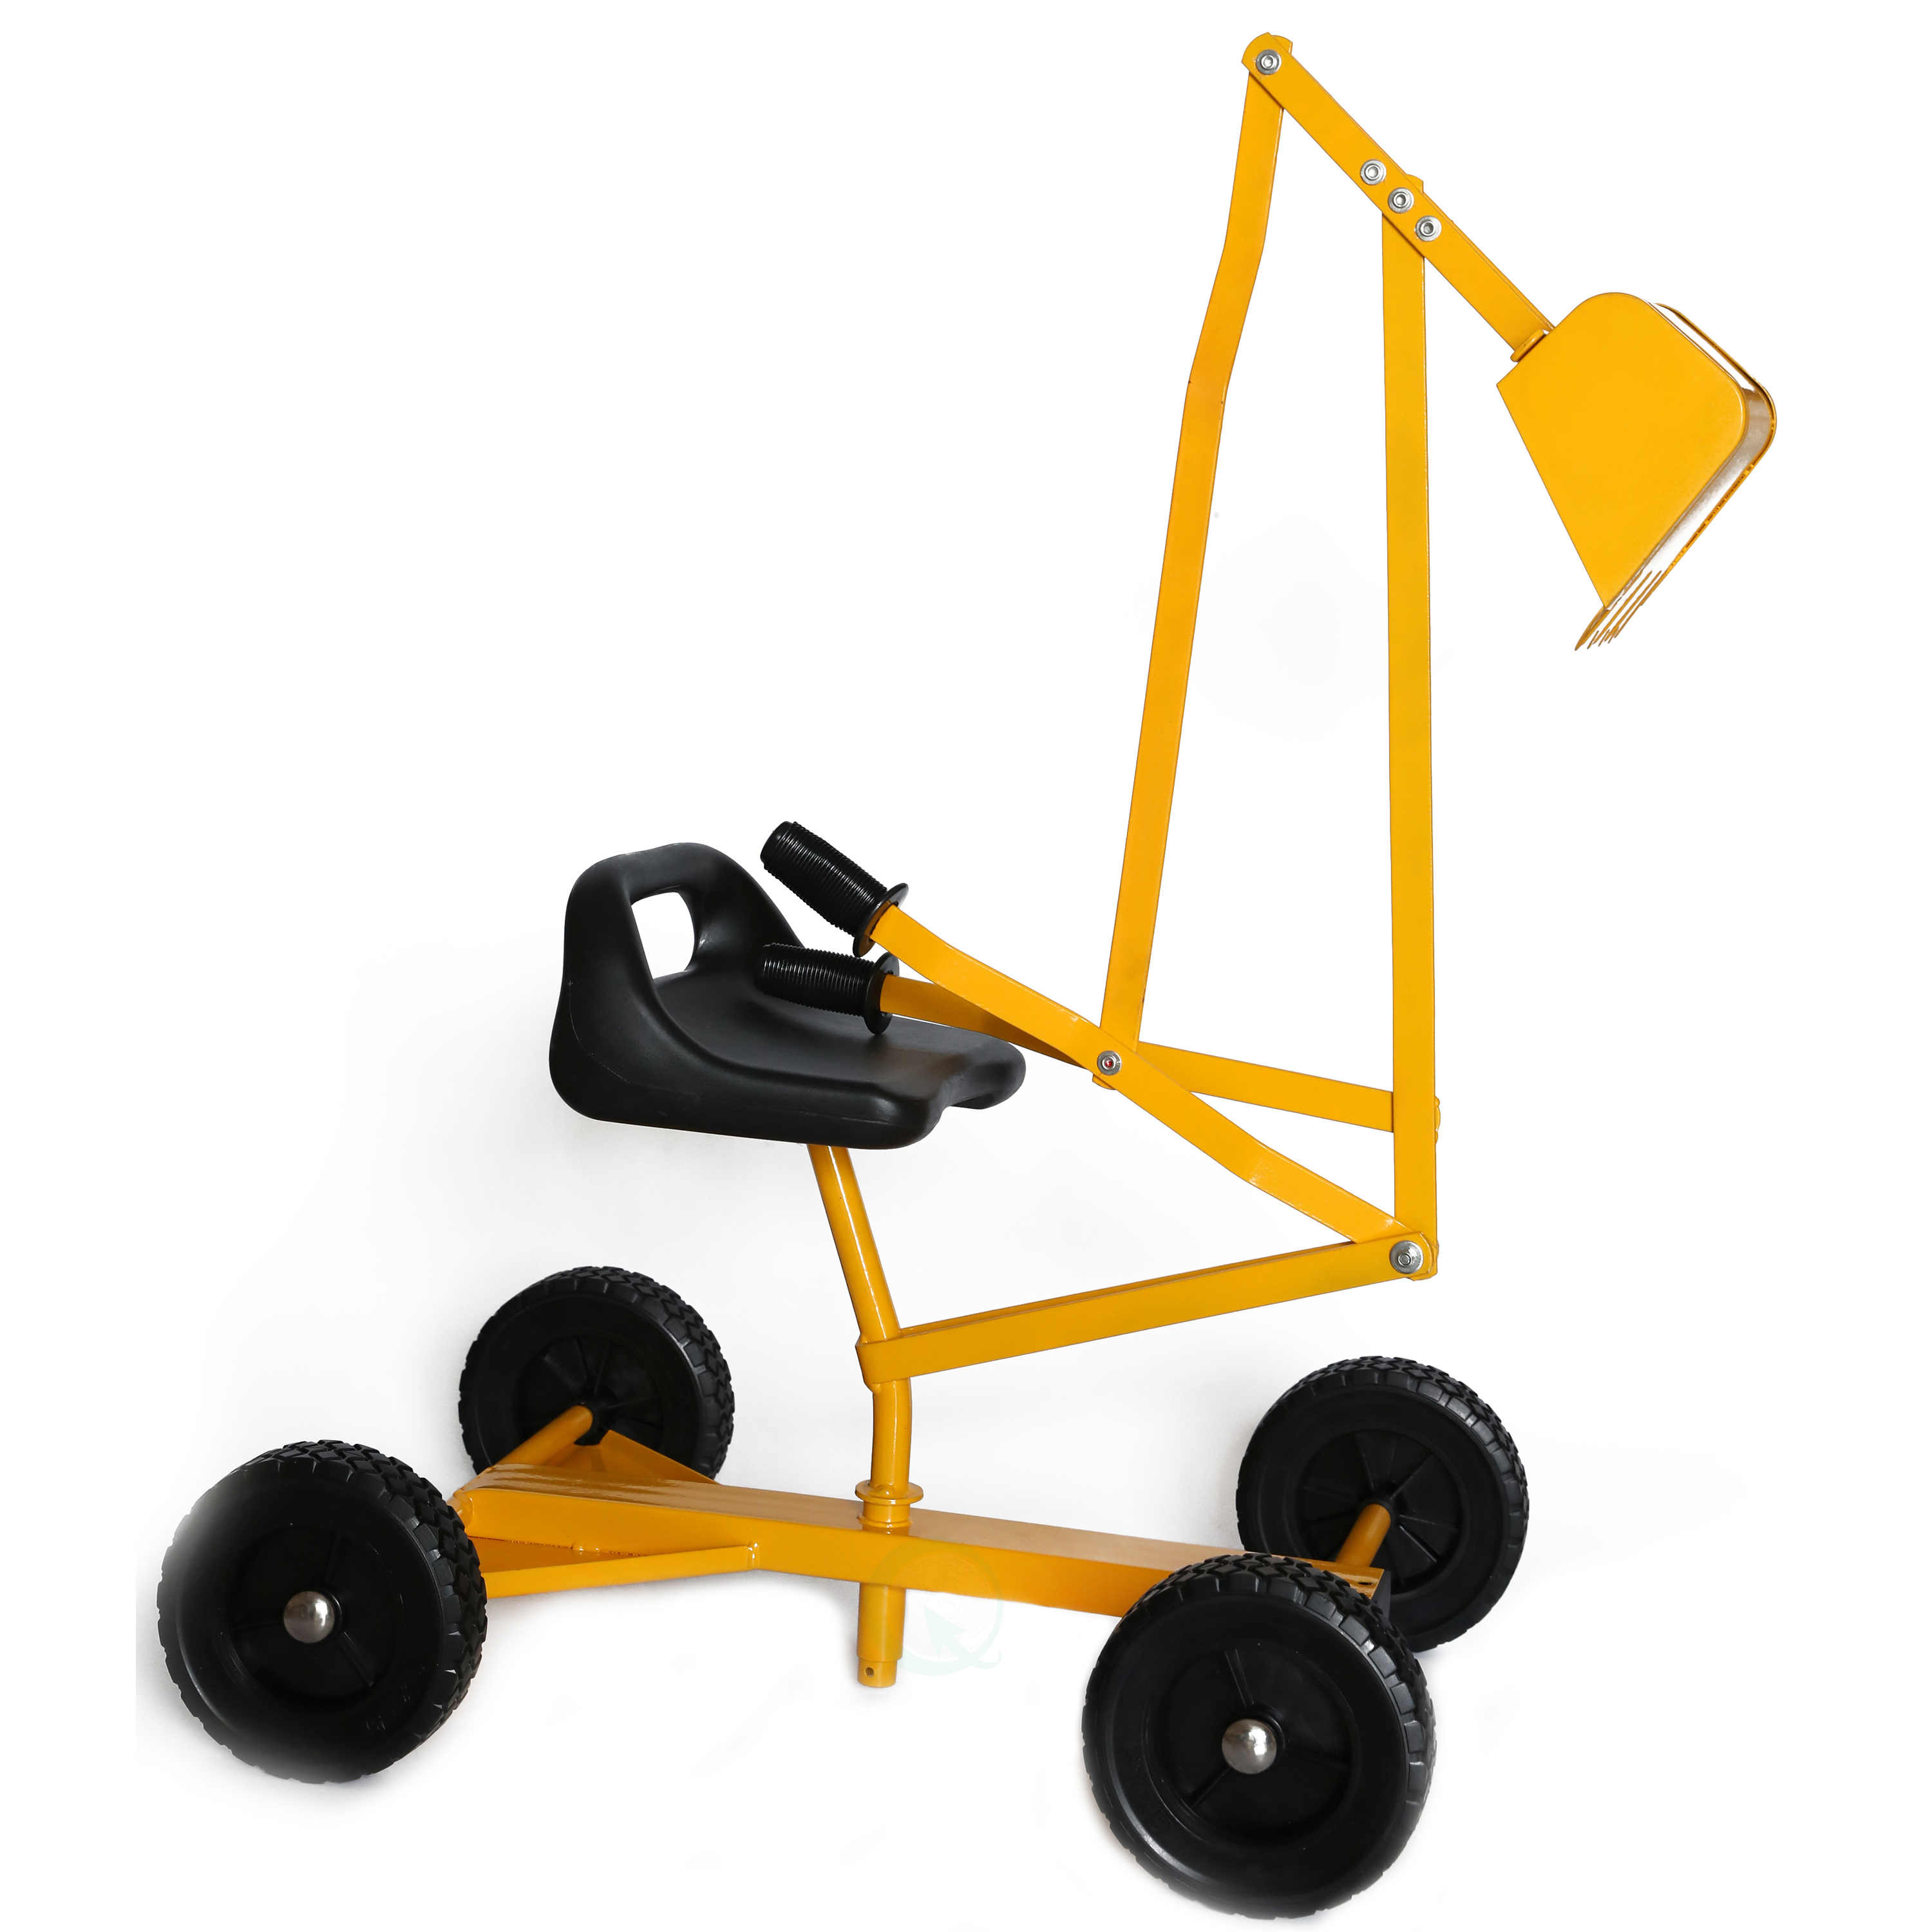 Metal Sand Digger Toy Crane With Wheels